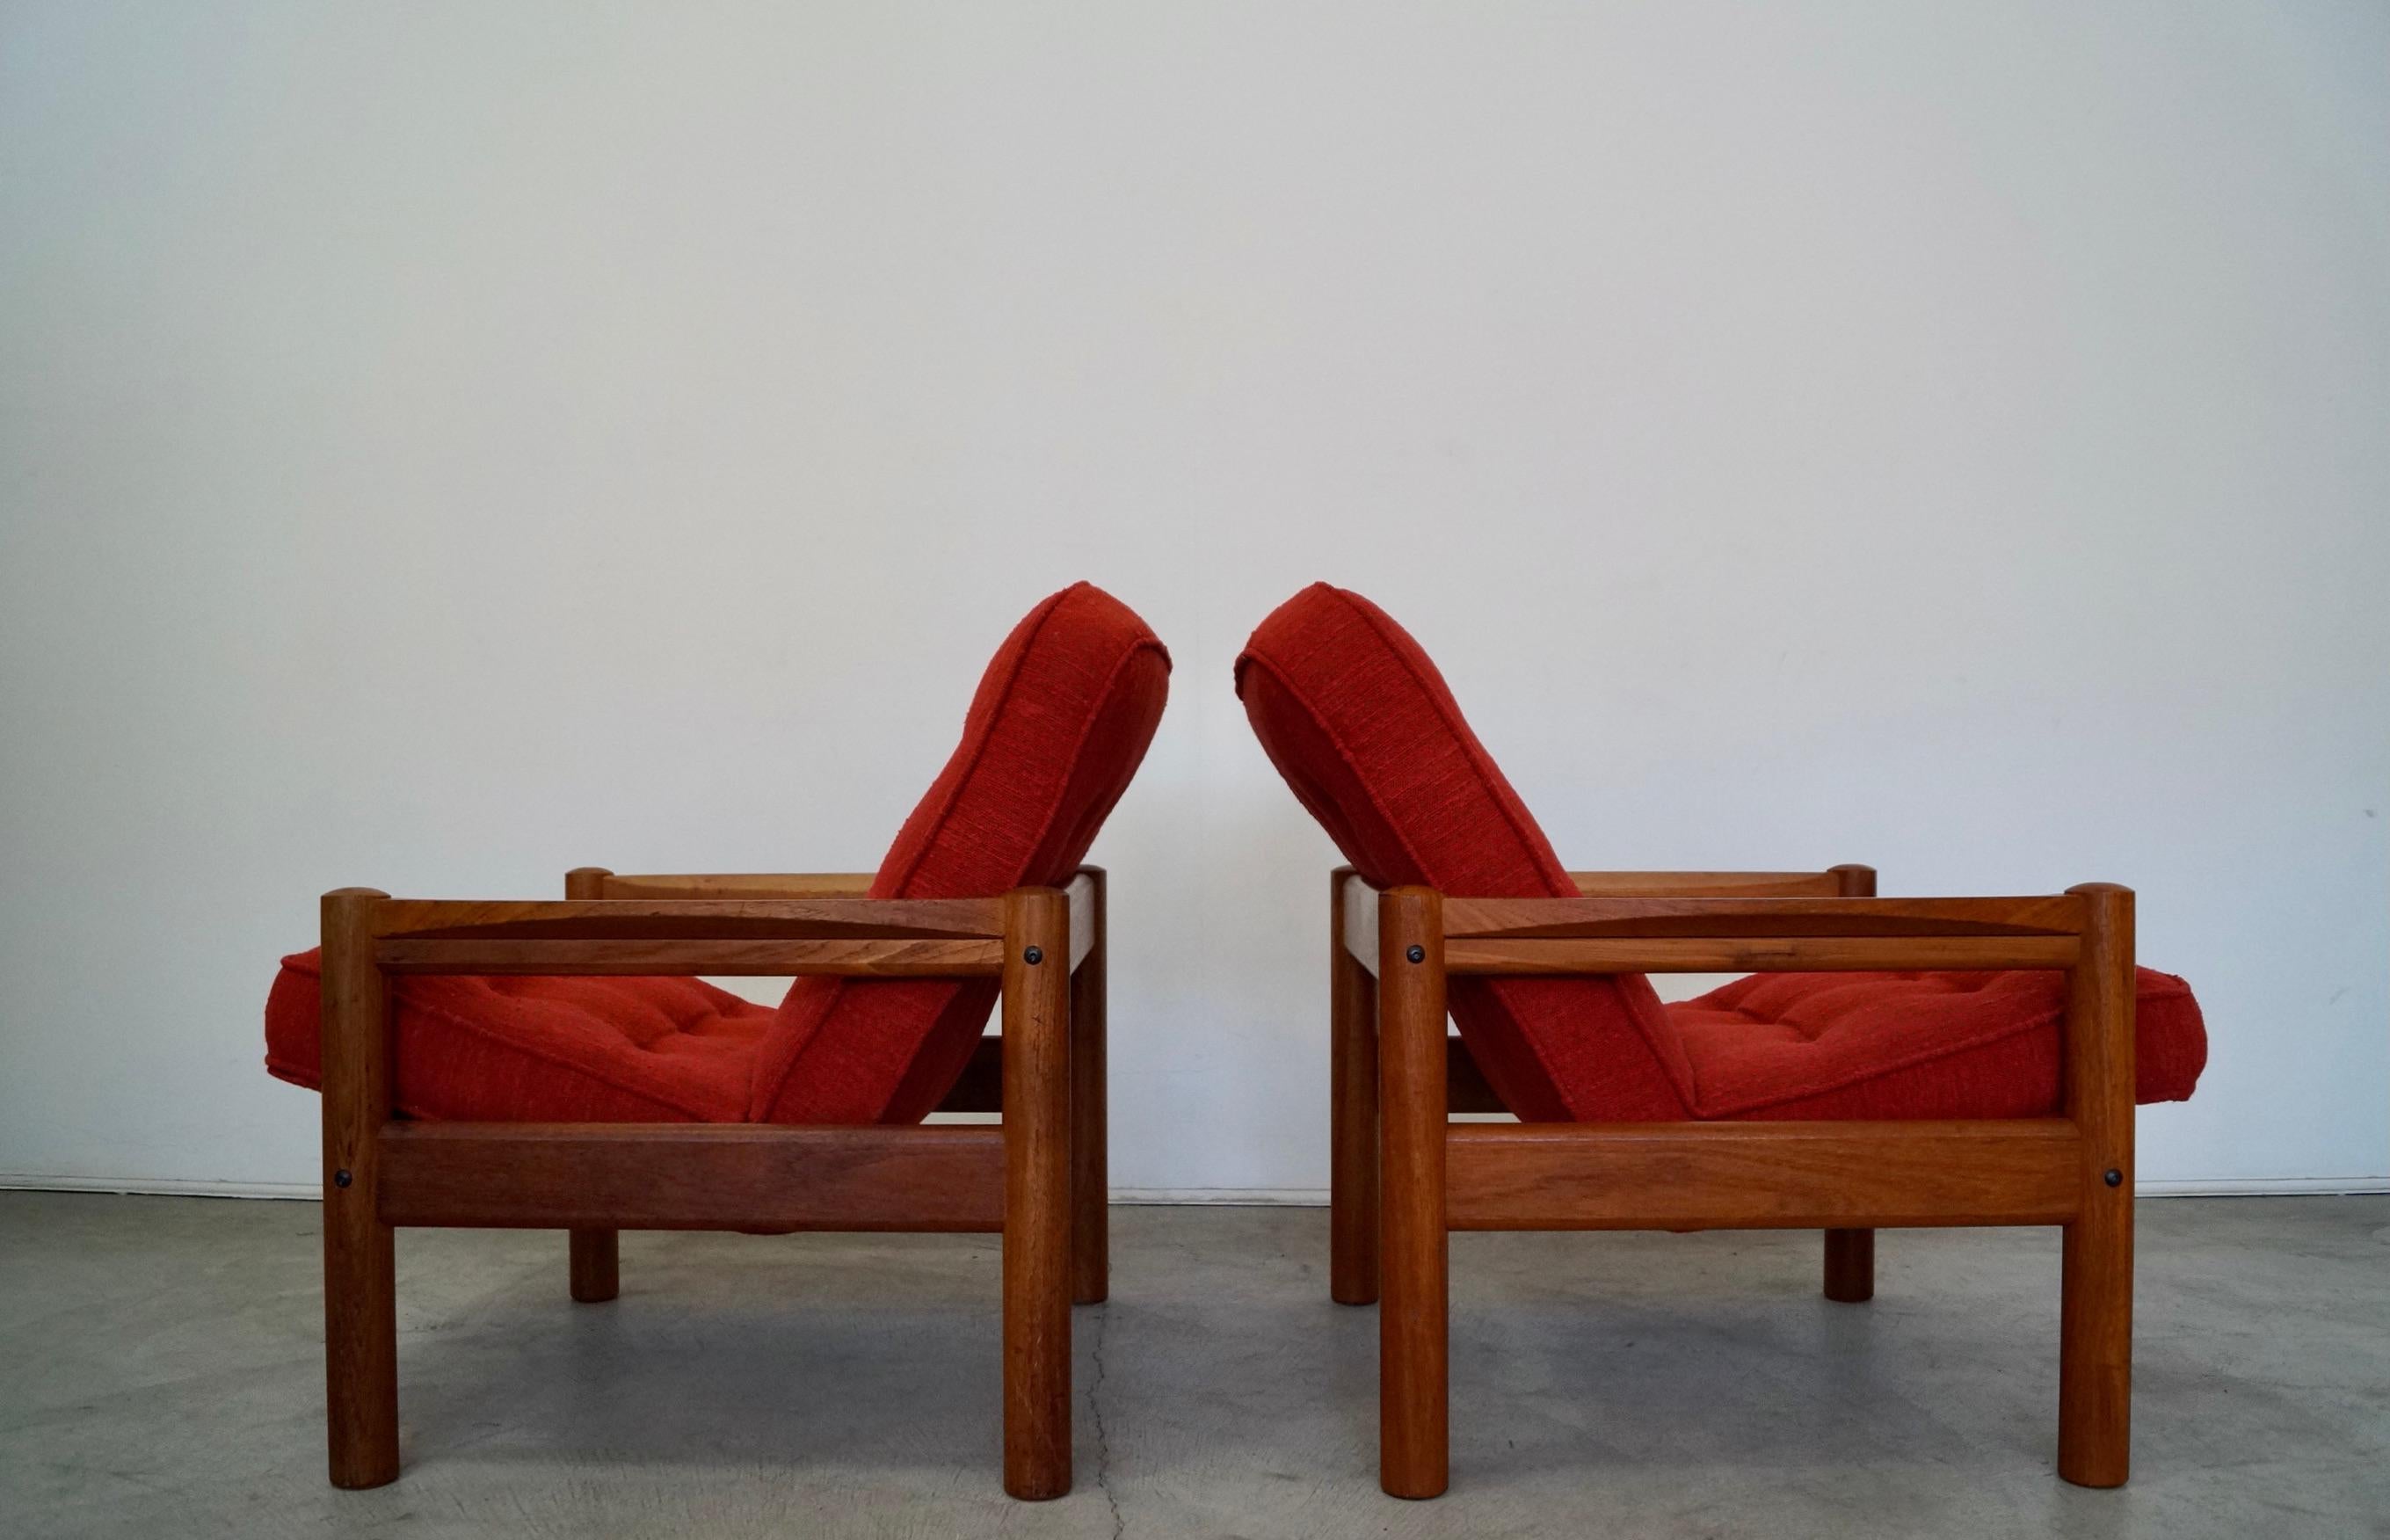 1970's Danish Modern Teak Lounge Chairs by Domino Mobler - a Pair For Sale 2